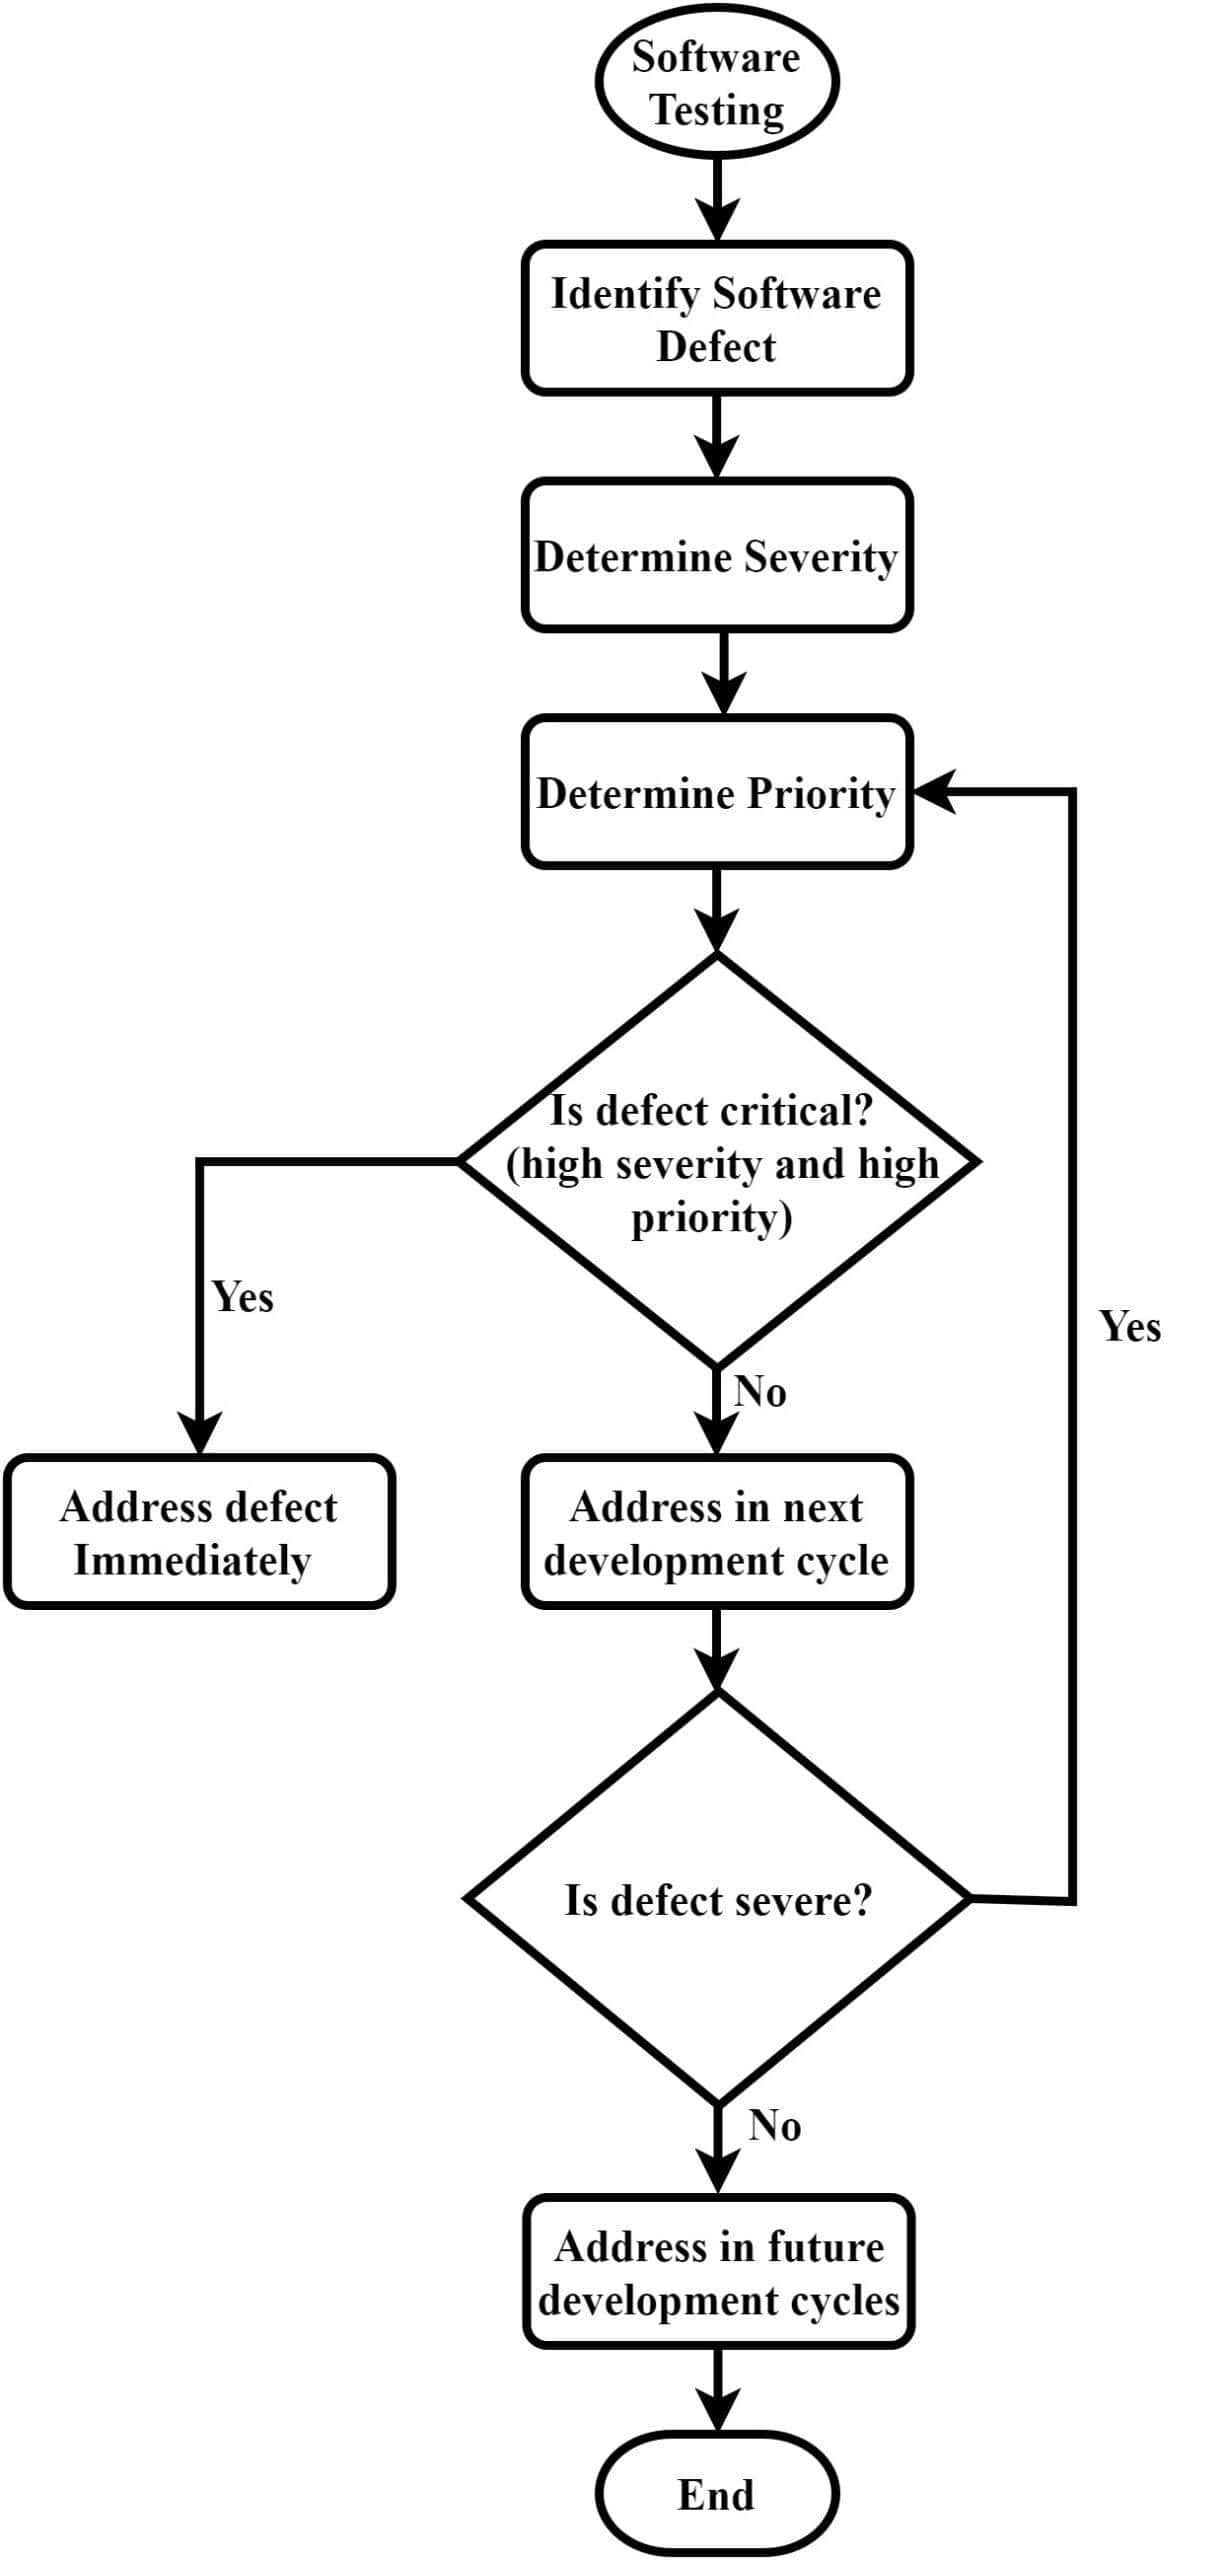 Prioritizing defects based on severity and priority